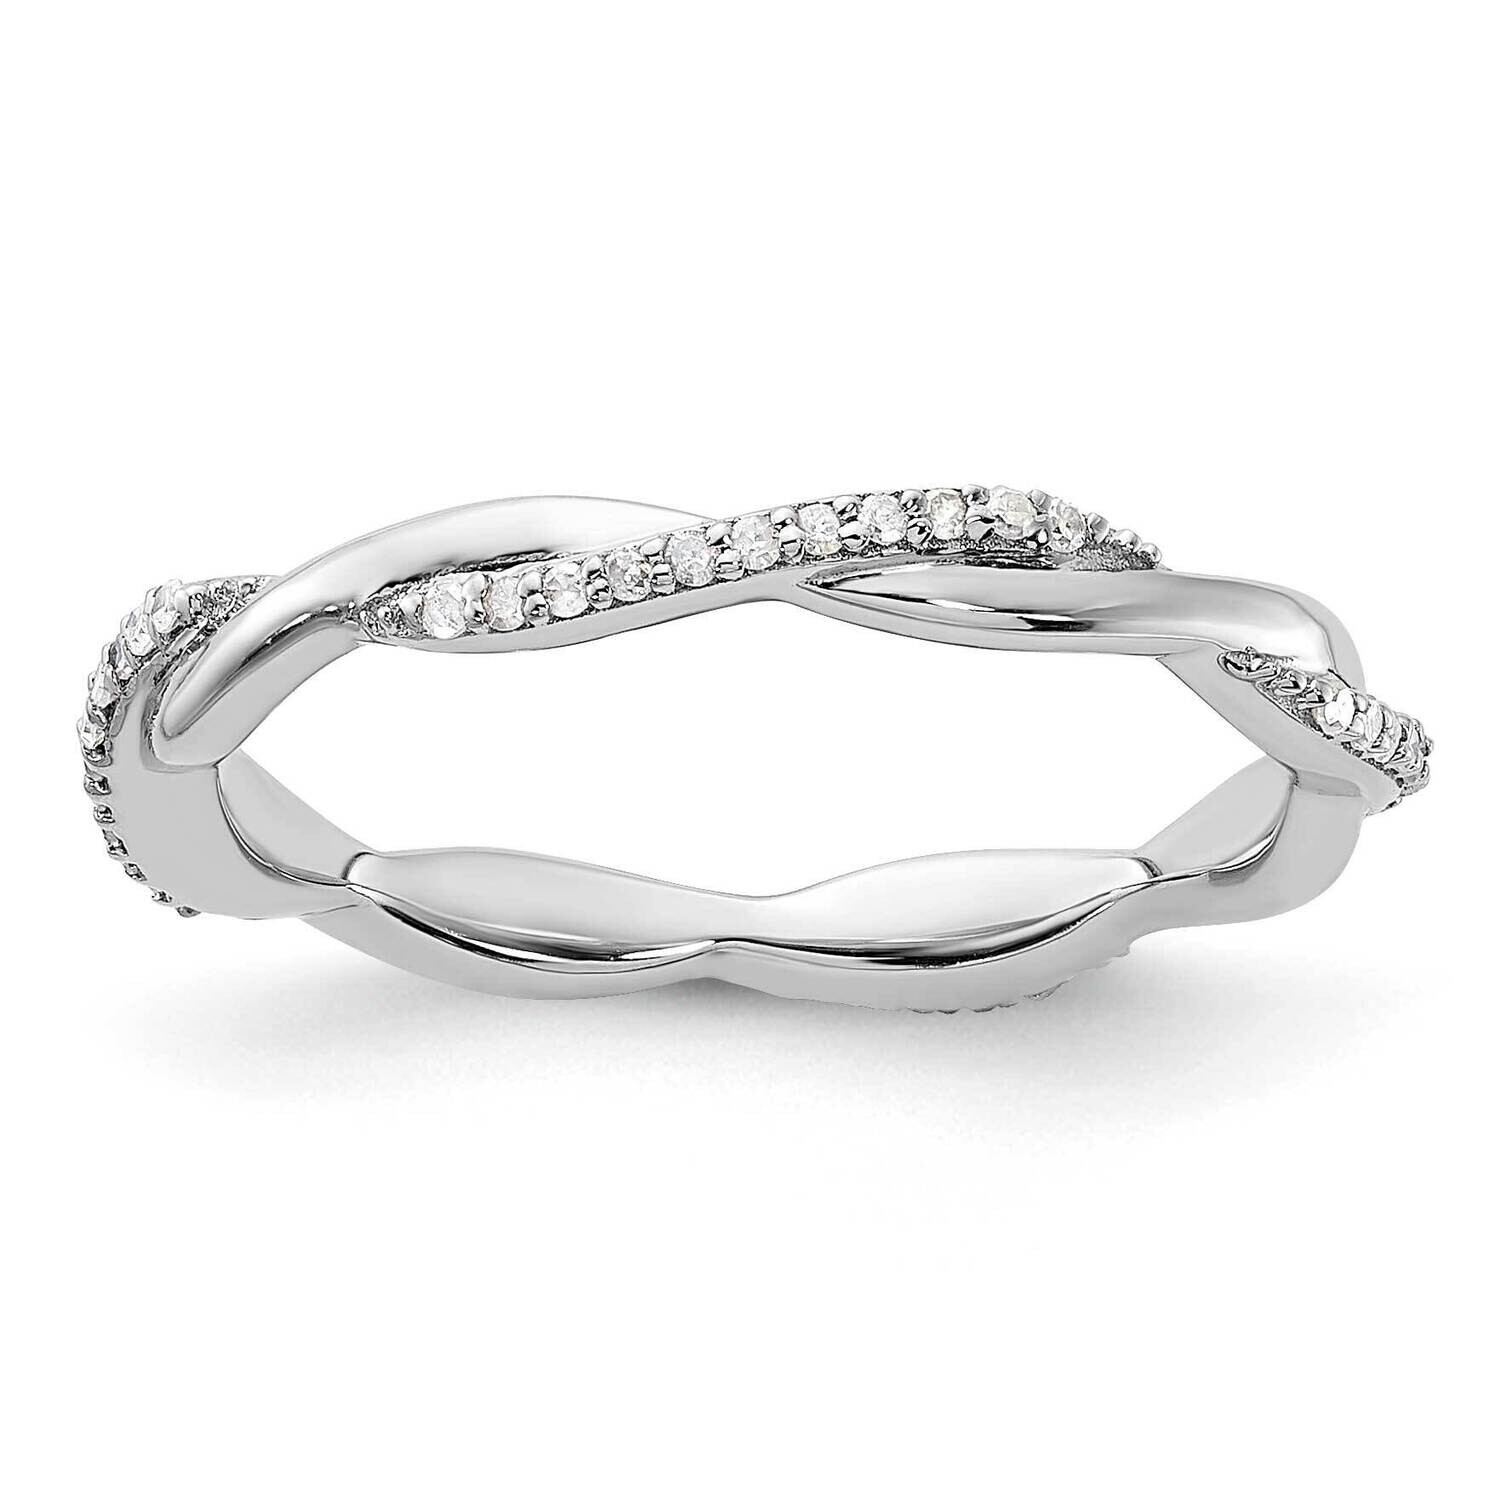 Stackable Expressions Polished Diamond Ring Sterling Silver QSK633